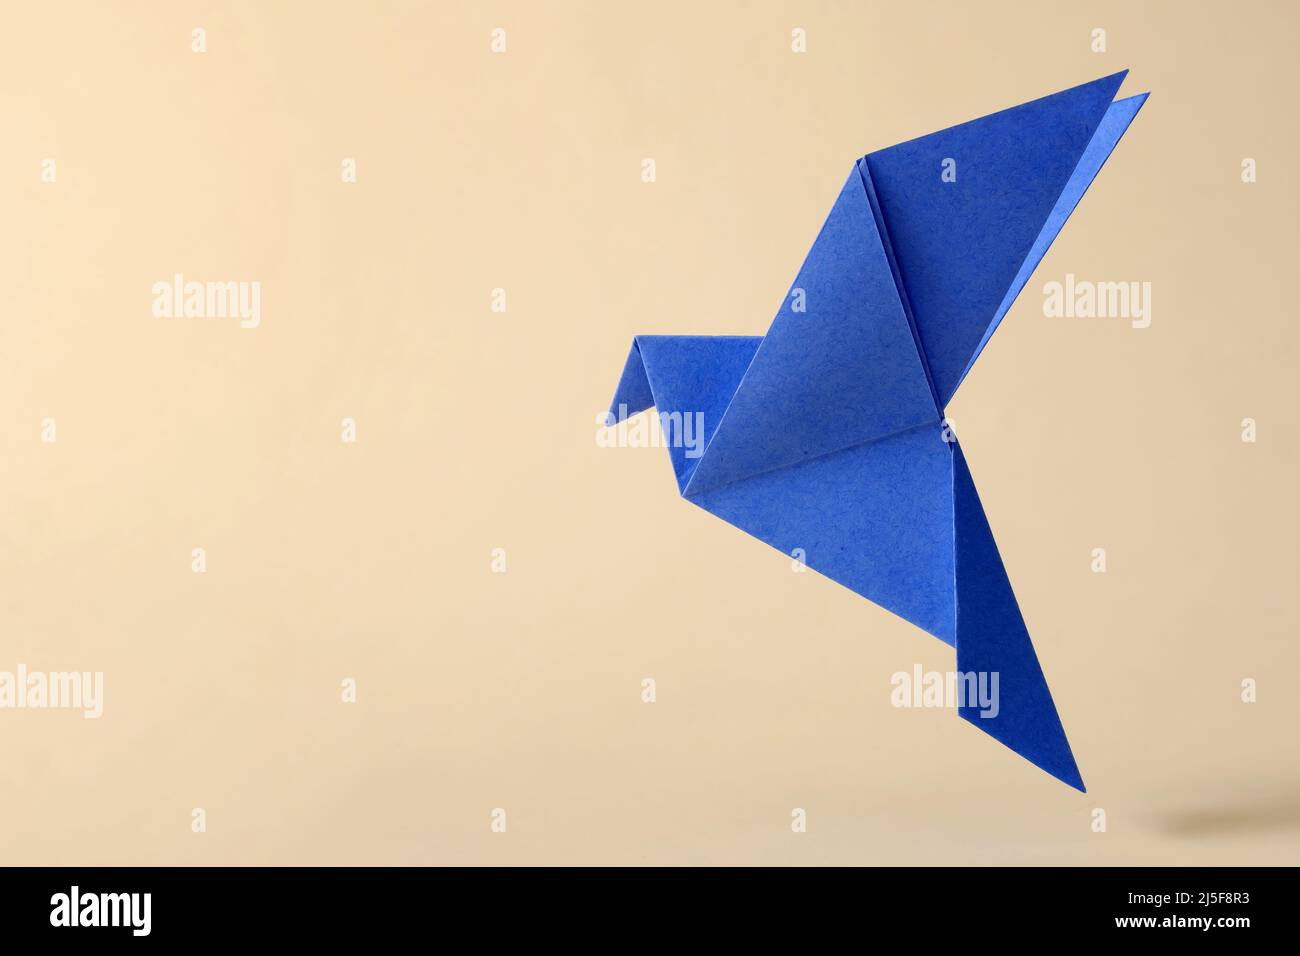 Pigeon flying minimal concept of japanese origami craft handmade toy. Stock Photo